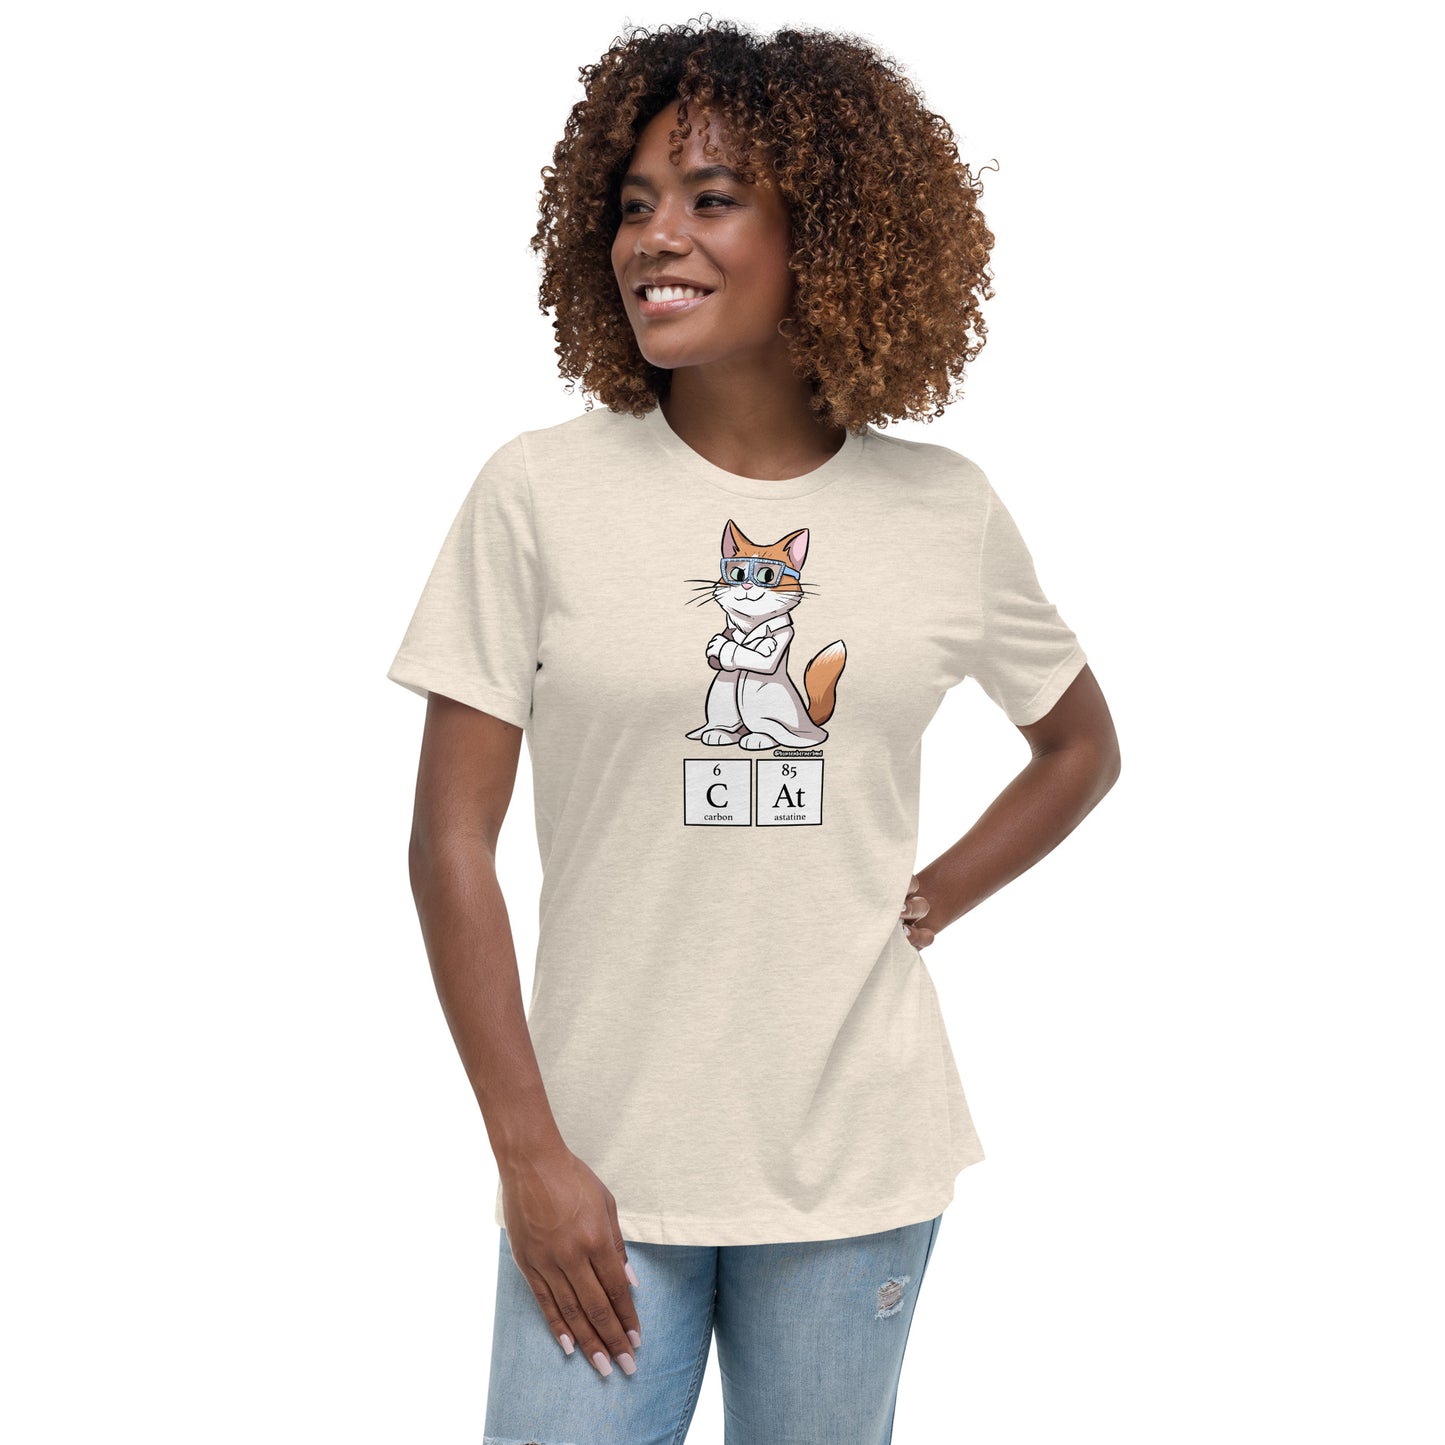 Women's Relaxed T-Shirt: CAT in Periodic Symbols